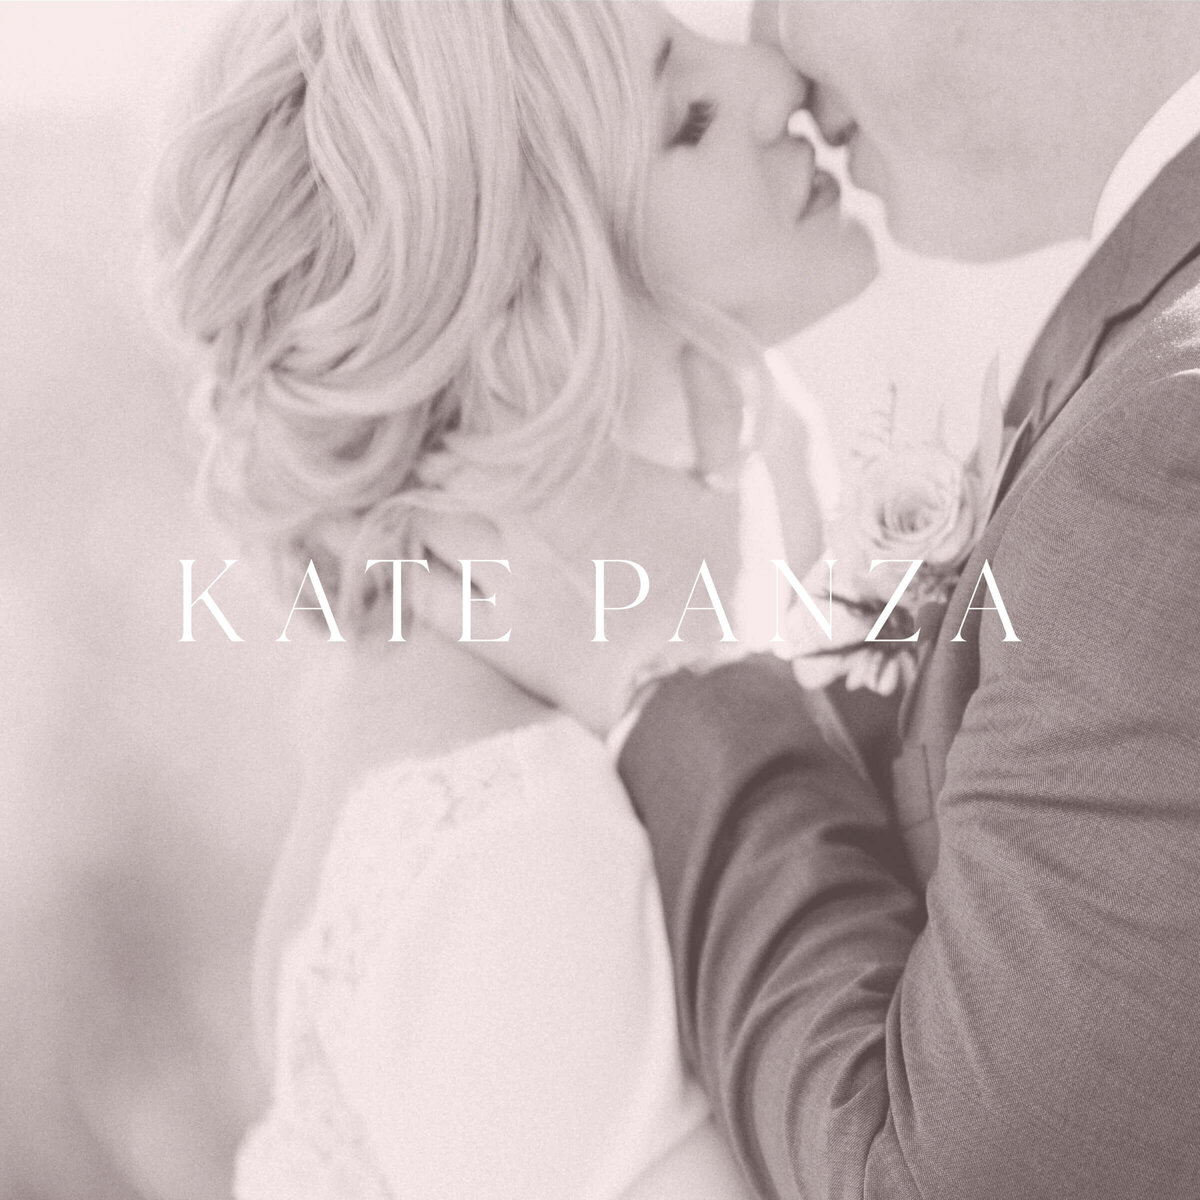 Brand and logo design for luxury wedding photographer Kate Panza